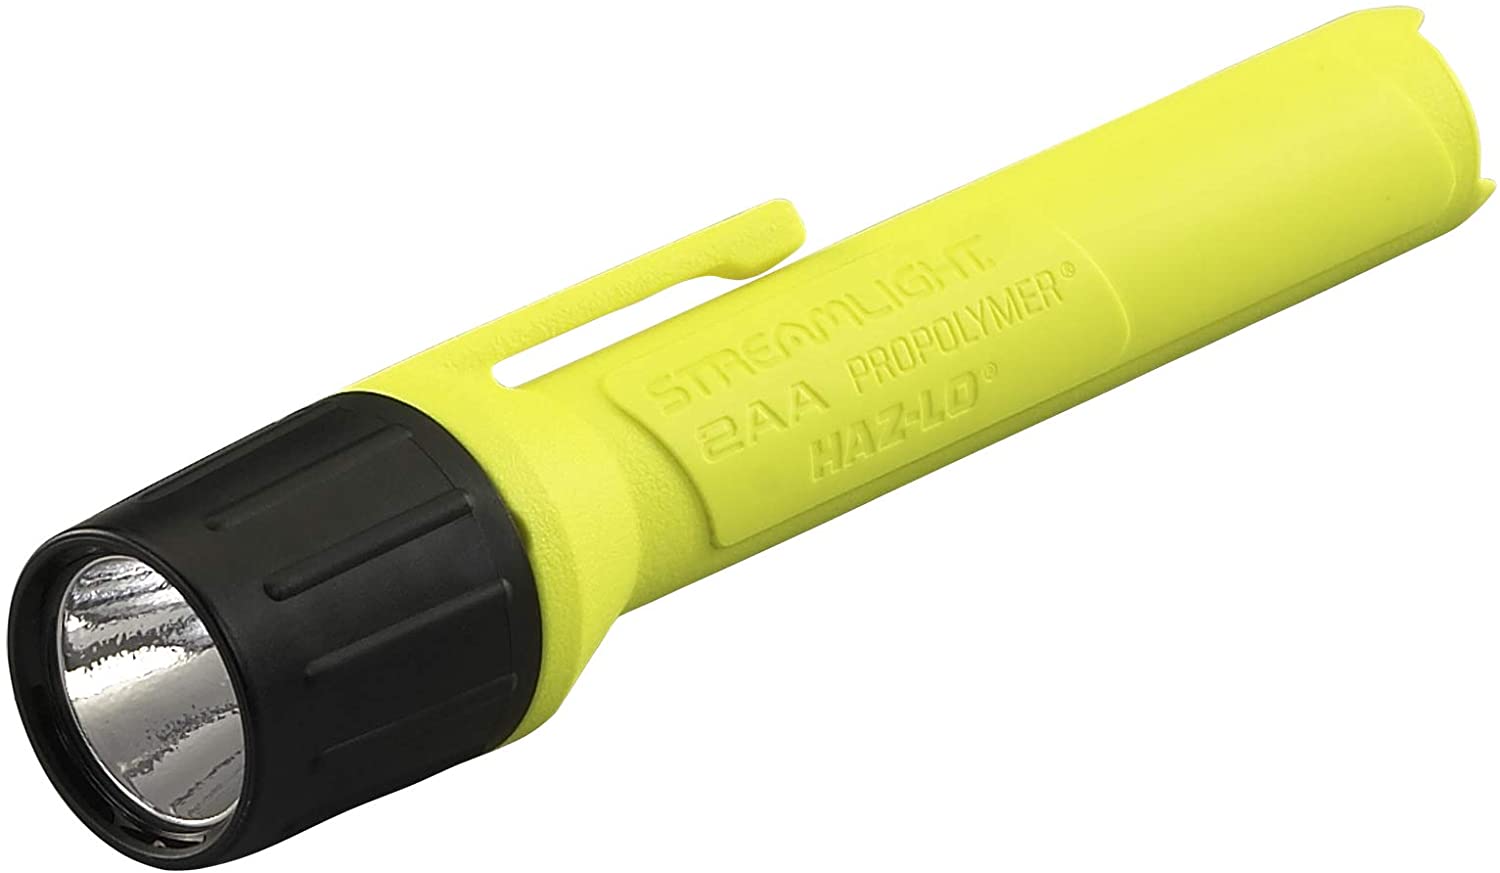 STREAMLIGHT PROPOLYMER 2AA LED WITH ALKALINE BATTERIES, YELLOW COLOUR